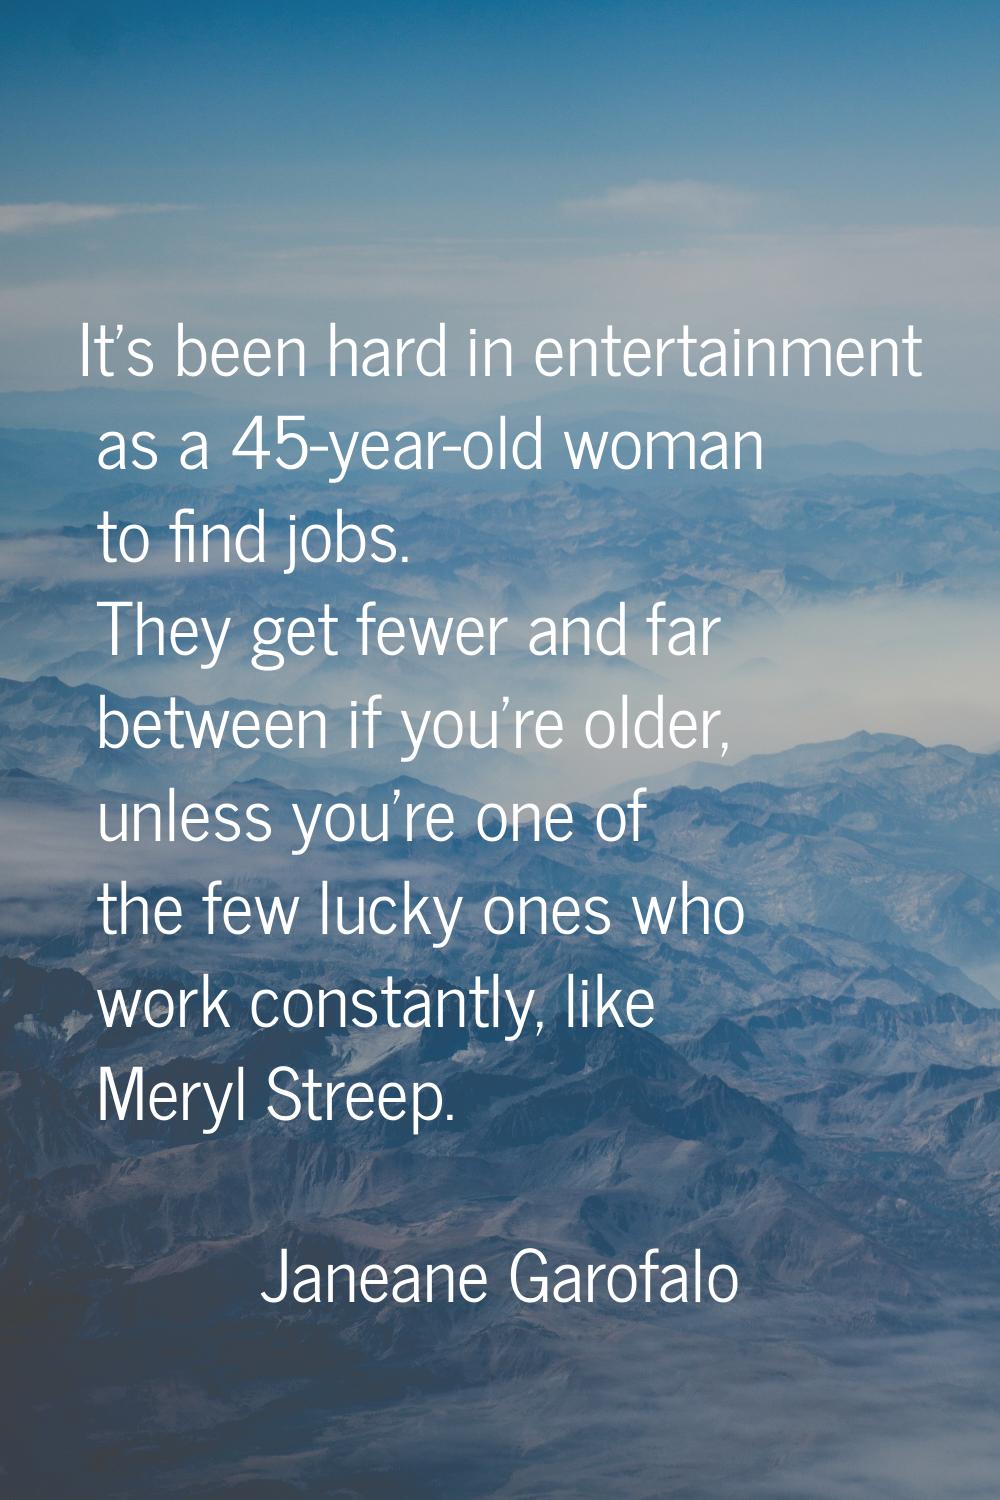 It's been hard in entertainment as a 45-year-old woman to find jobs. They get fewer and far between